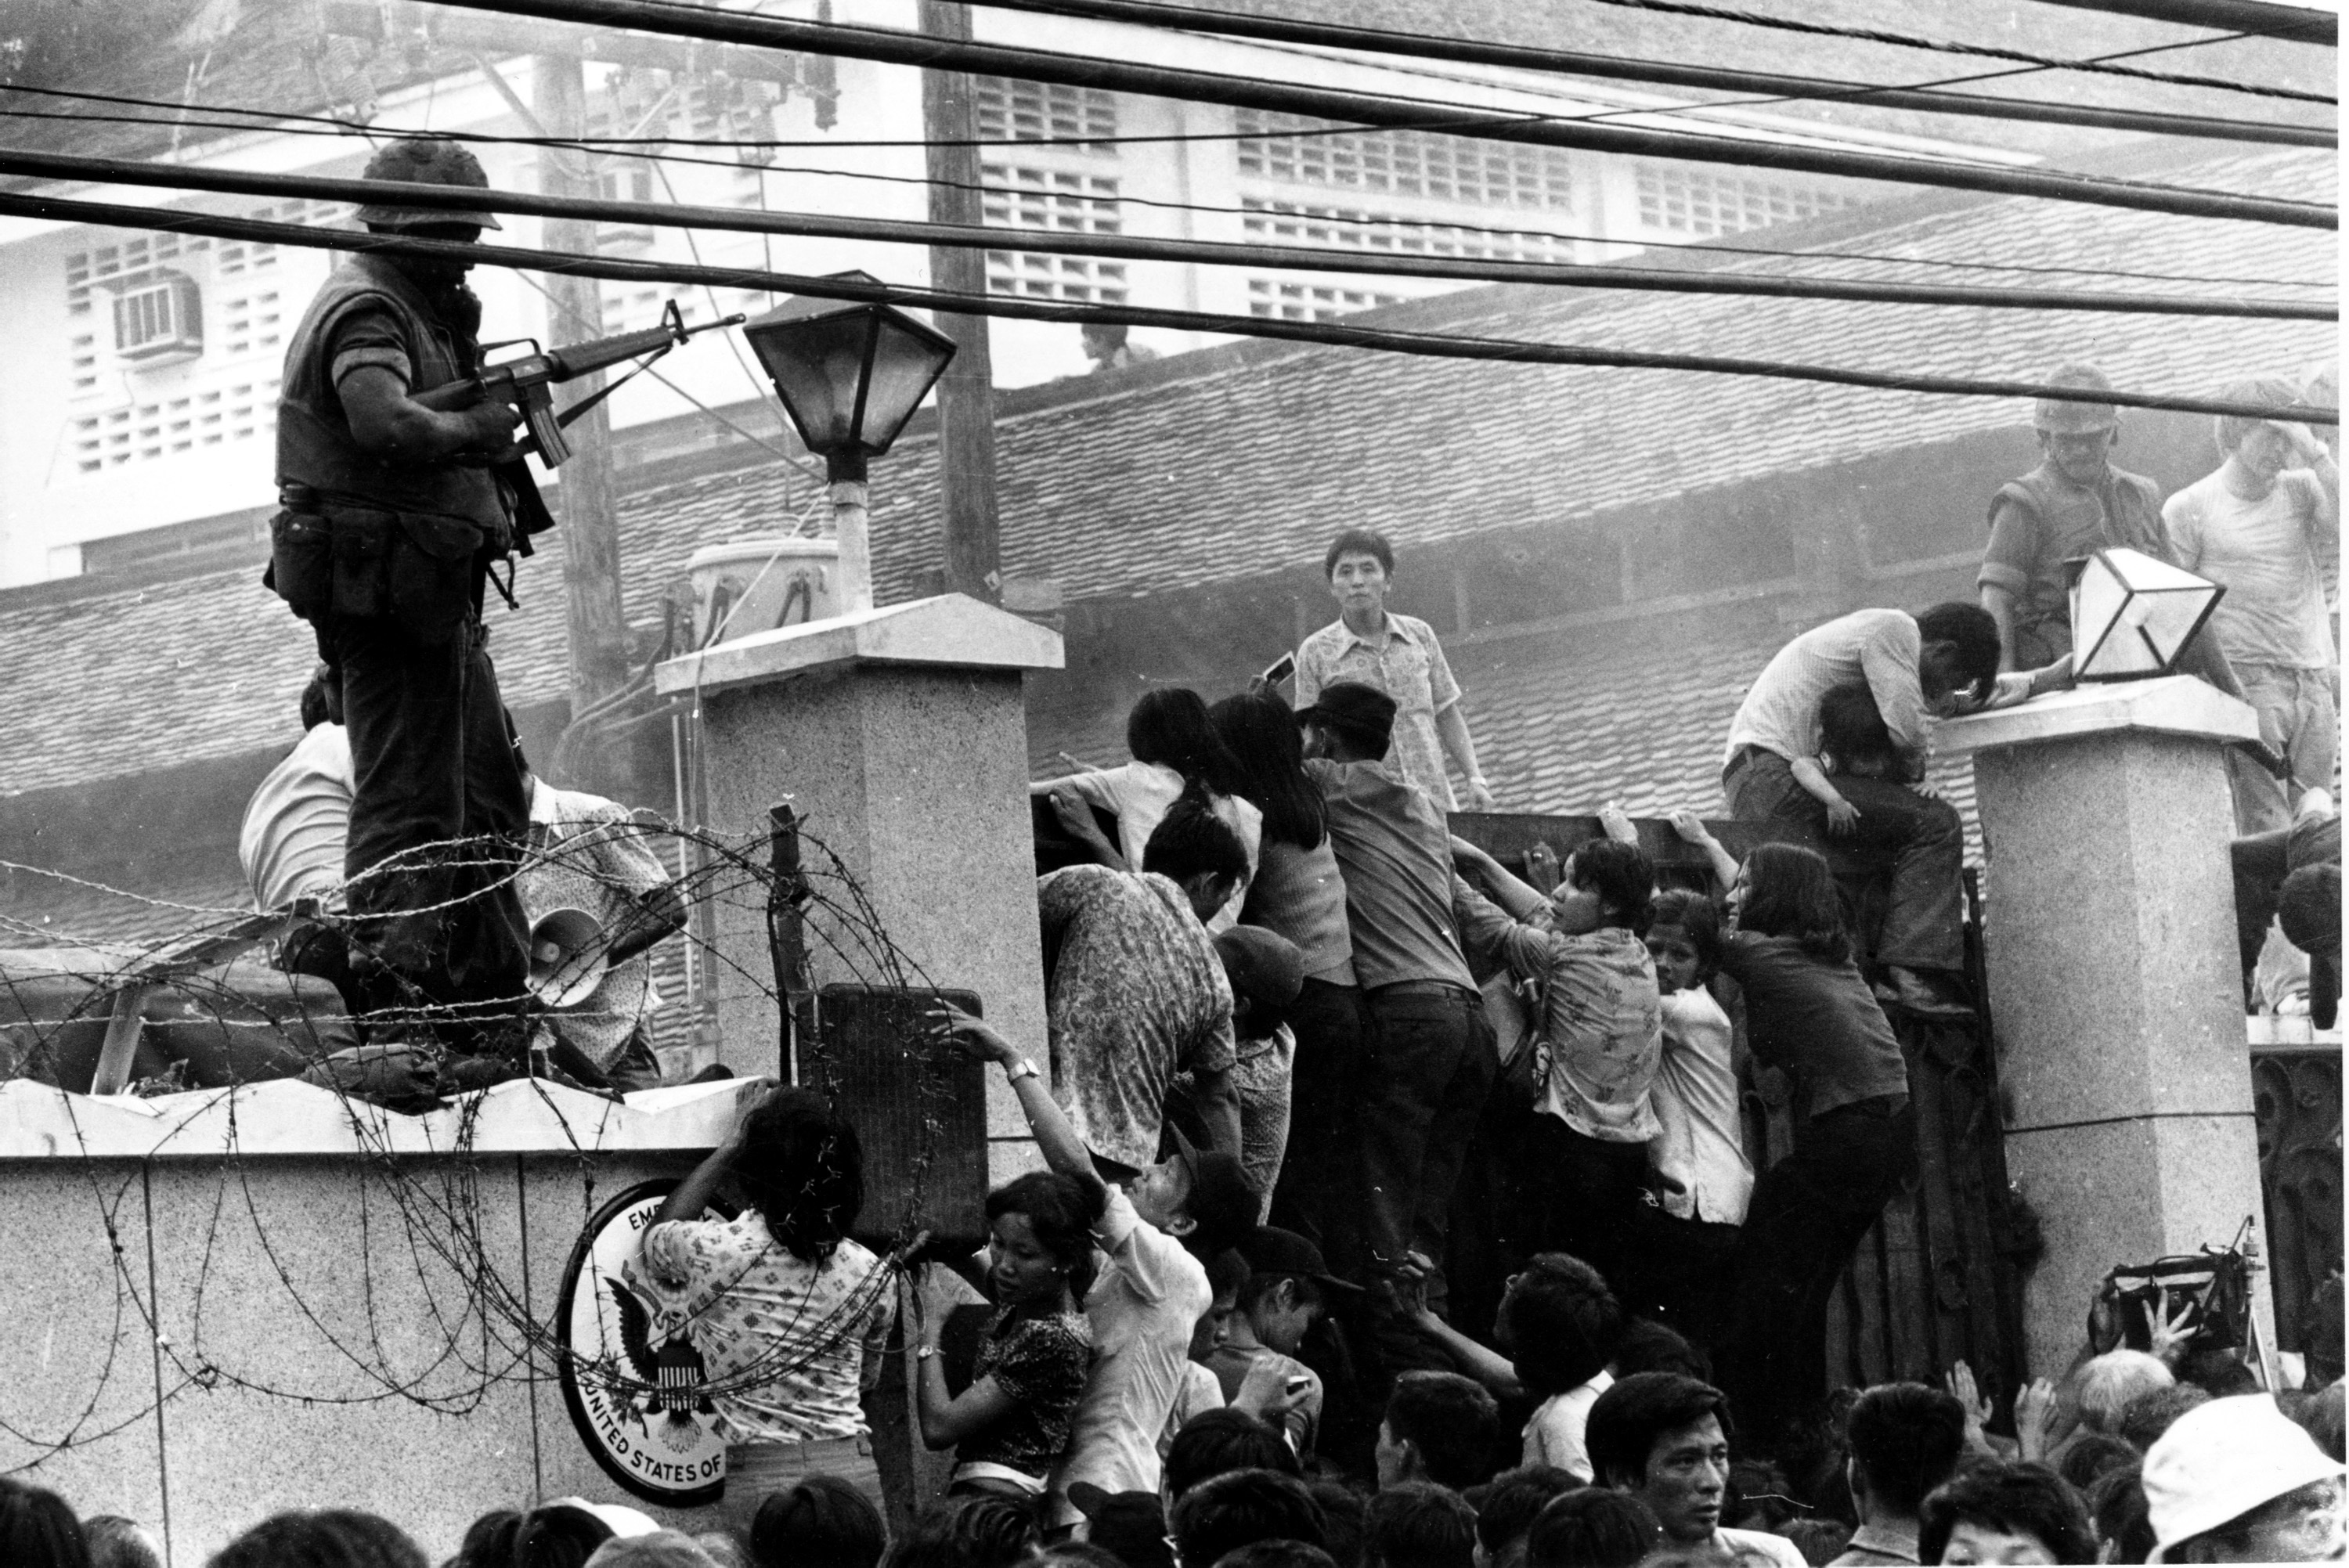 Mobs of Vietnamese people scale the wall of the U.S. Embassy in Saigon, Vietnam, trying to get to the helicopter pickup zone, just before the end of the Vietnam War on April 29, 1975.  (AP Photo/Neal Ulevich)